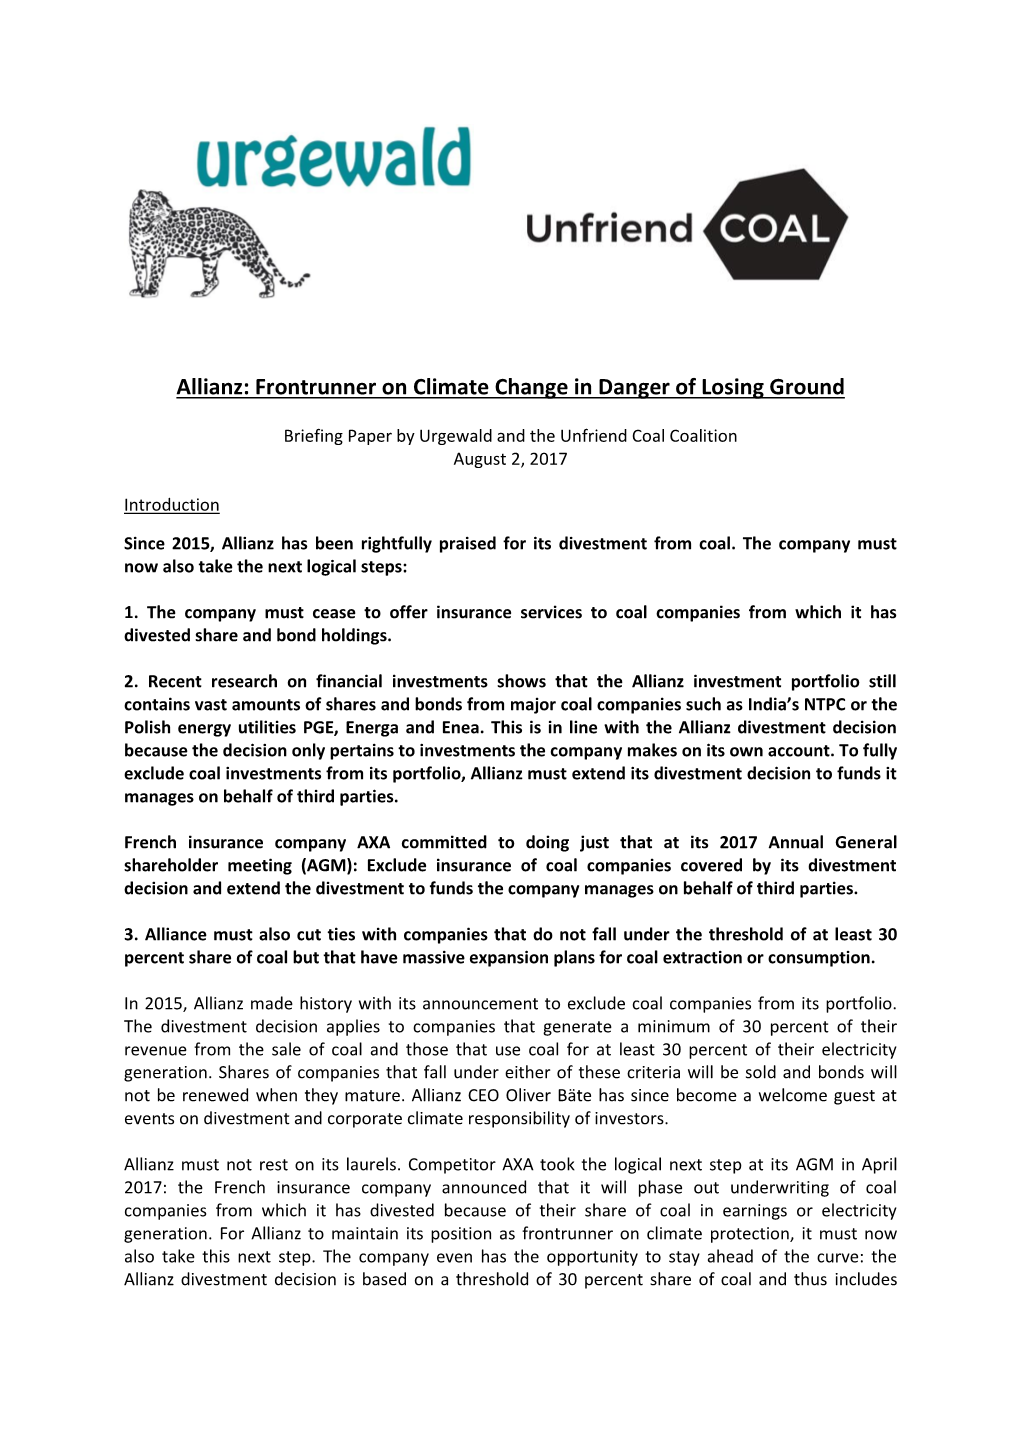 Allianz: Frontrunner on Climate Change in Danger of Losing Ground